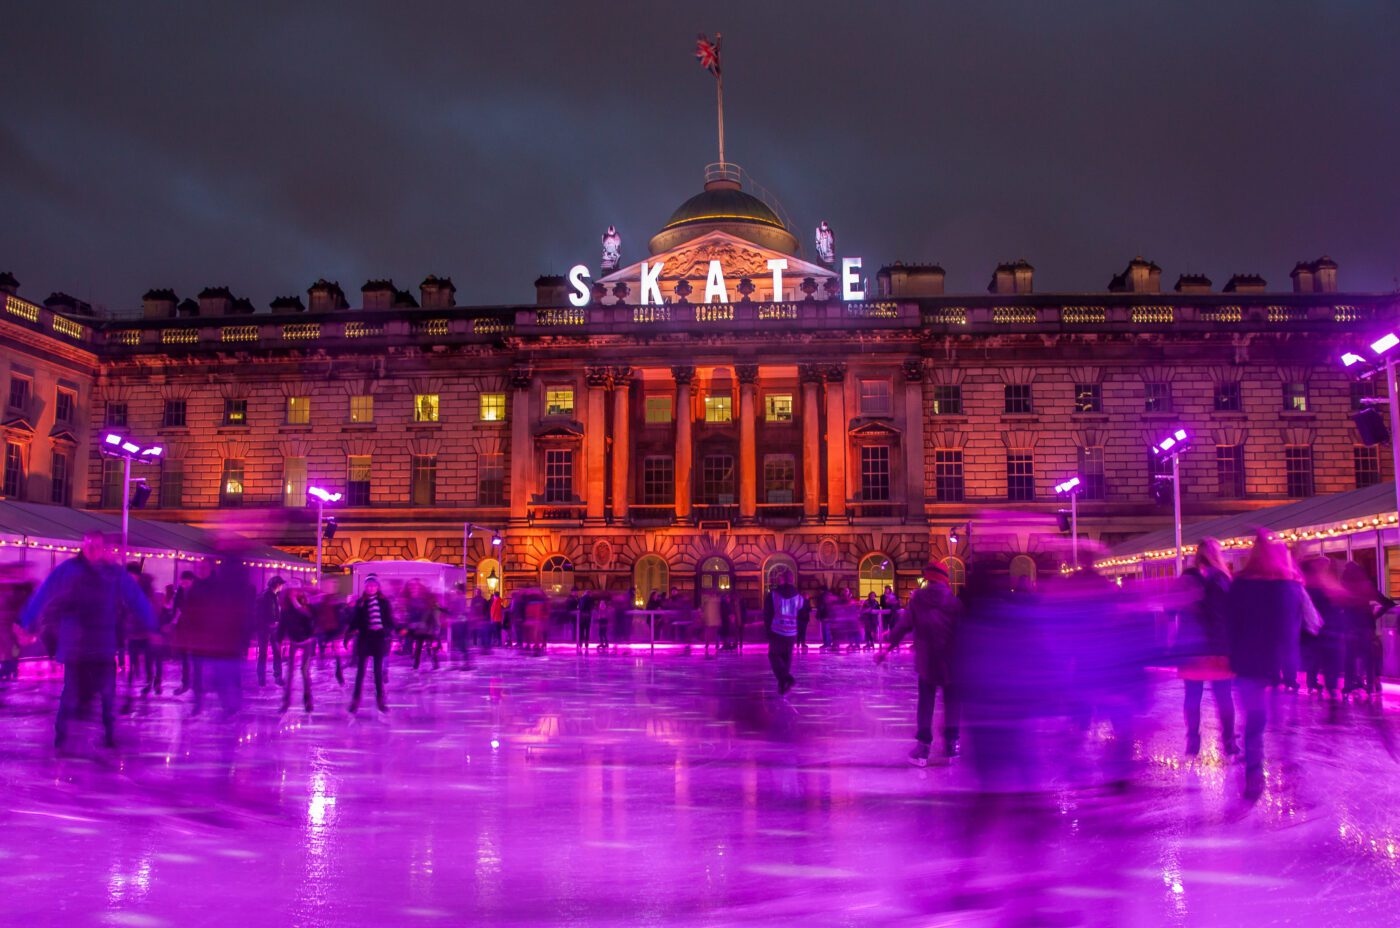 Somerset House's festive ice rink lit in purple for Christmas.